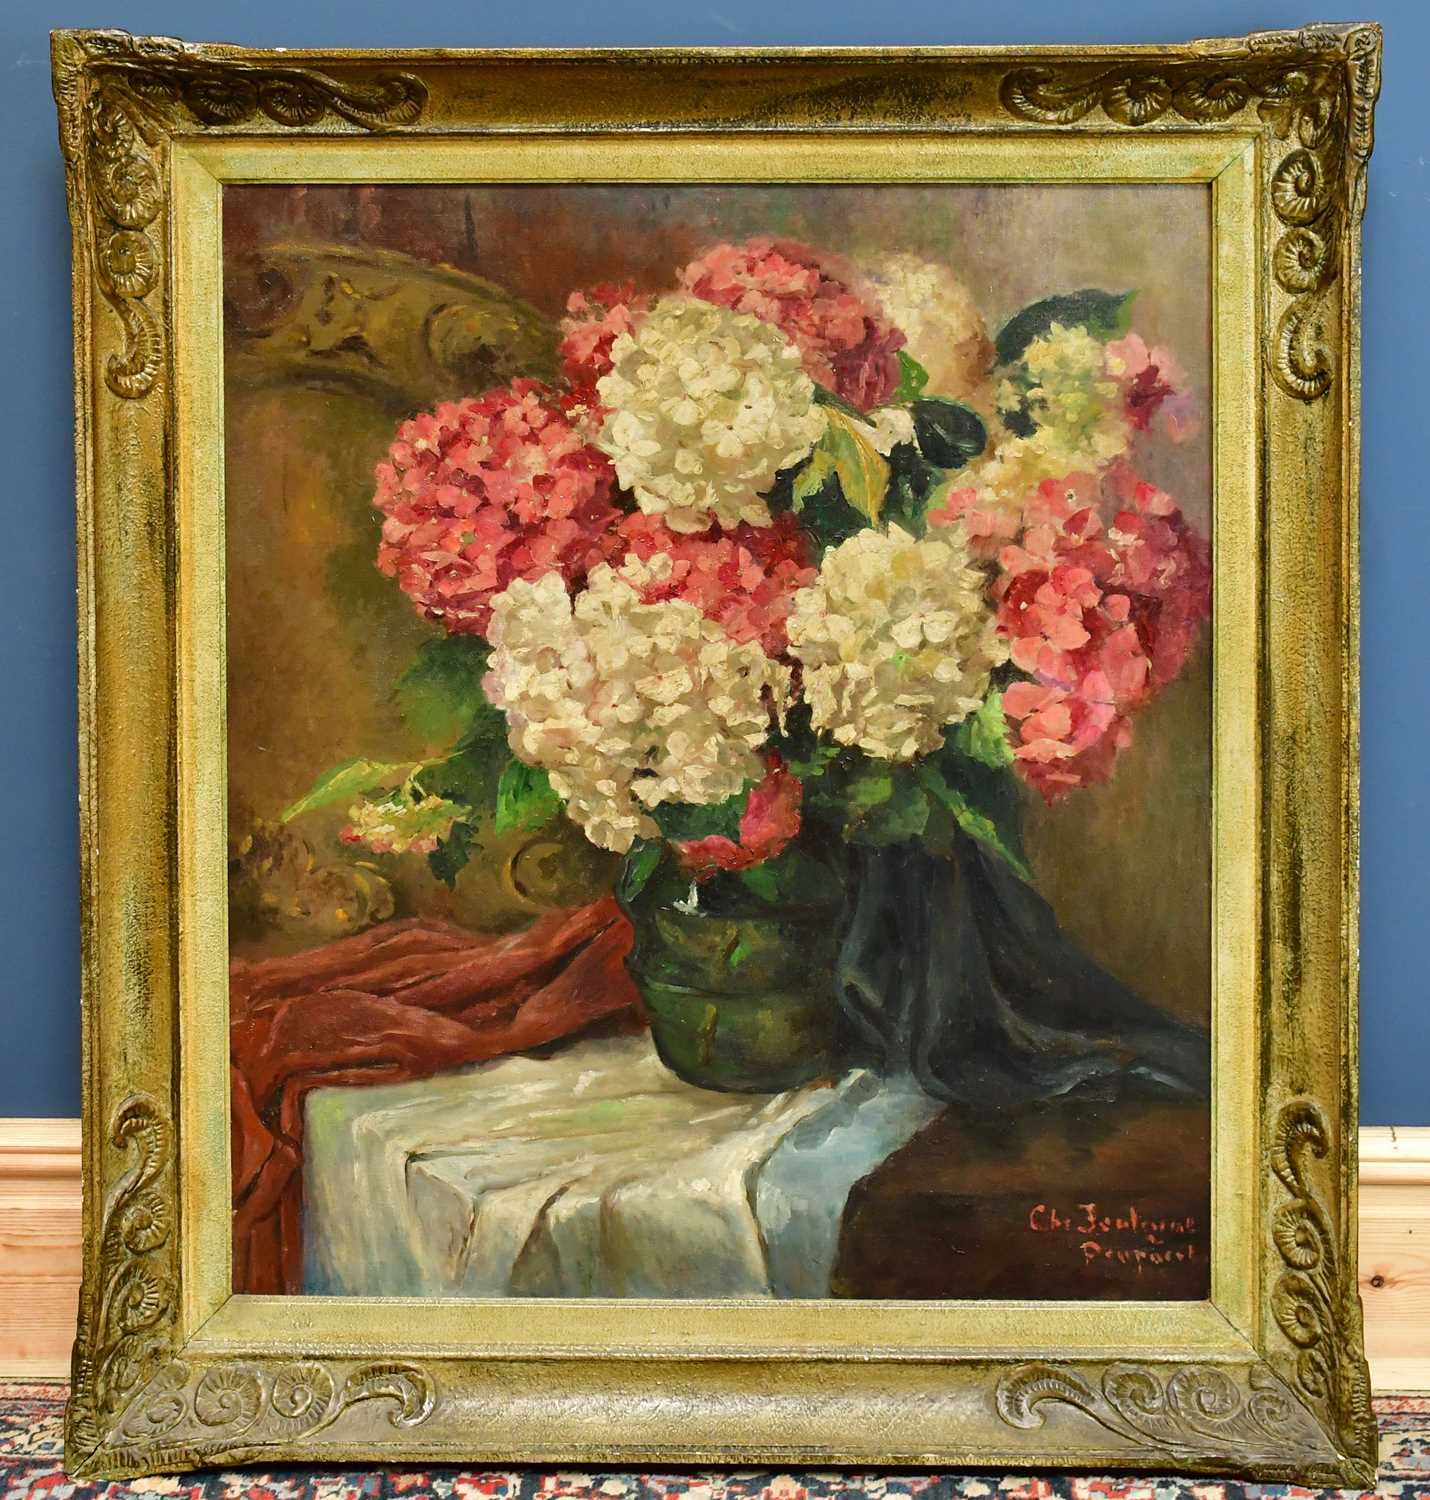 EARLY 20TH CENTURY; oil on canvas, still life flowers in a vase, indistinctly signed, in ornate gilt